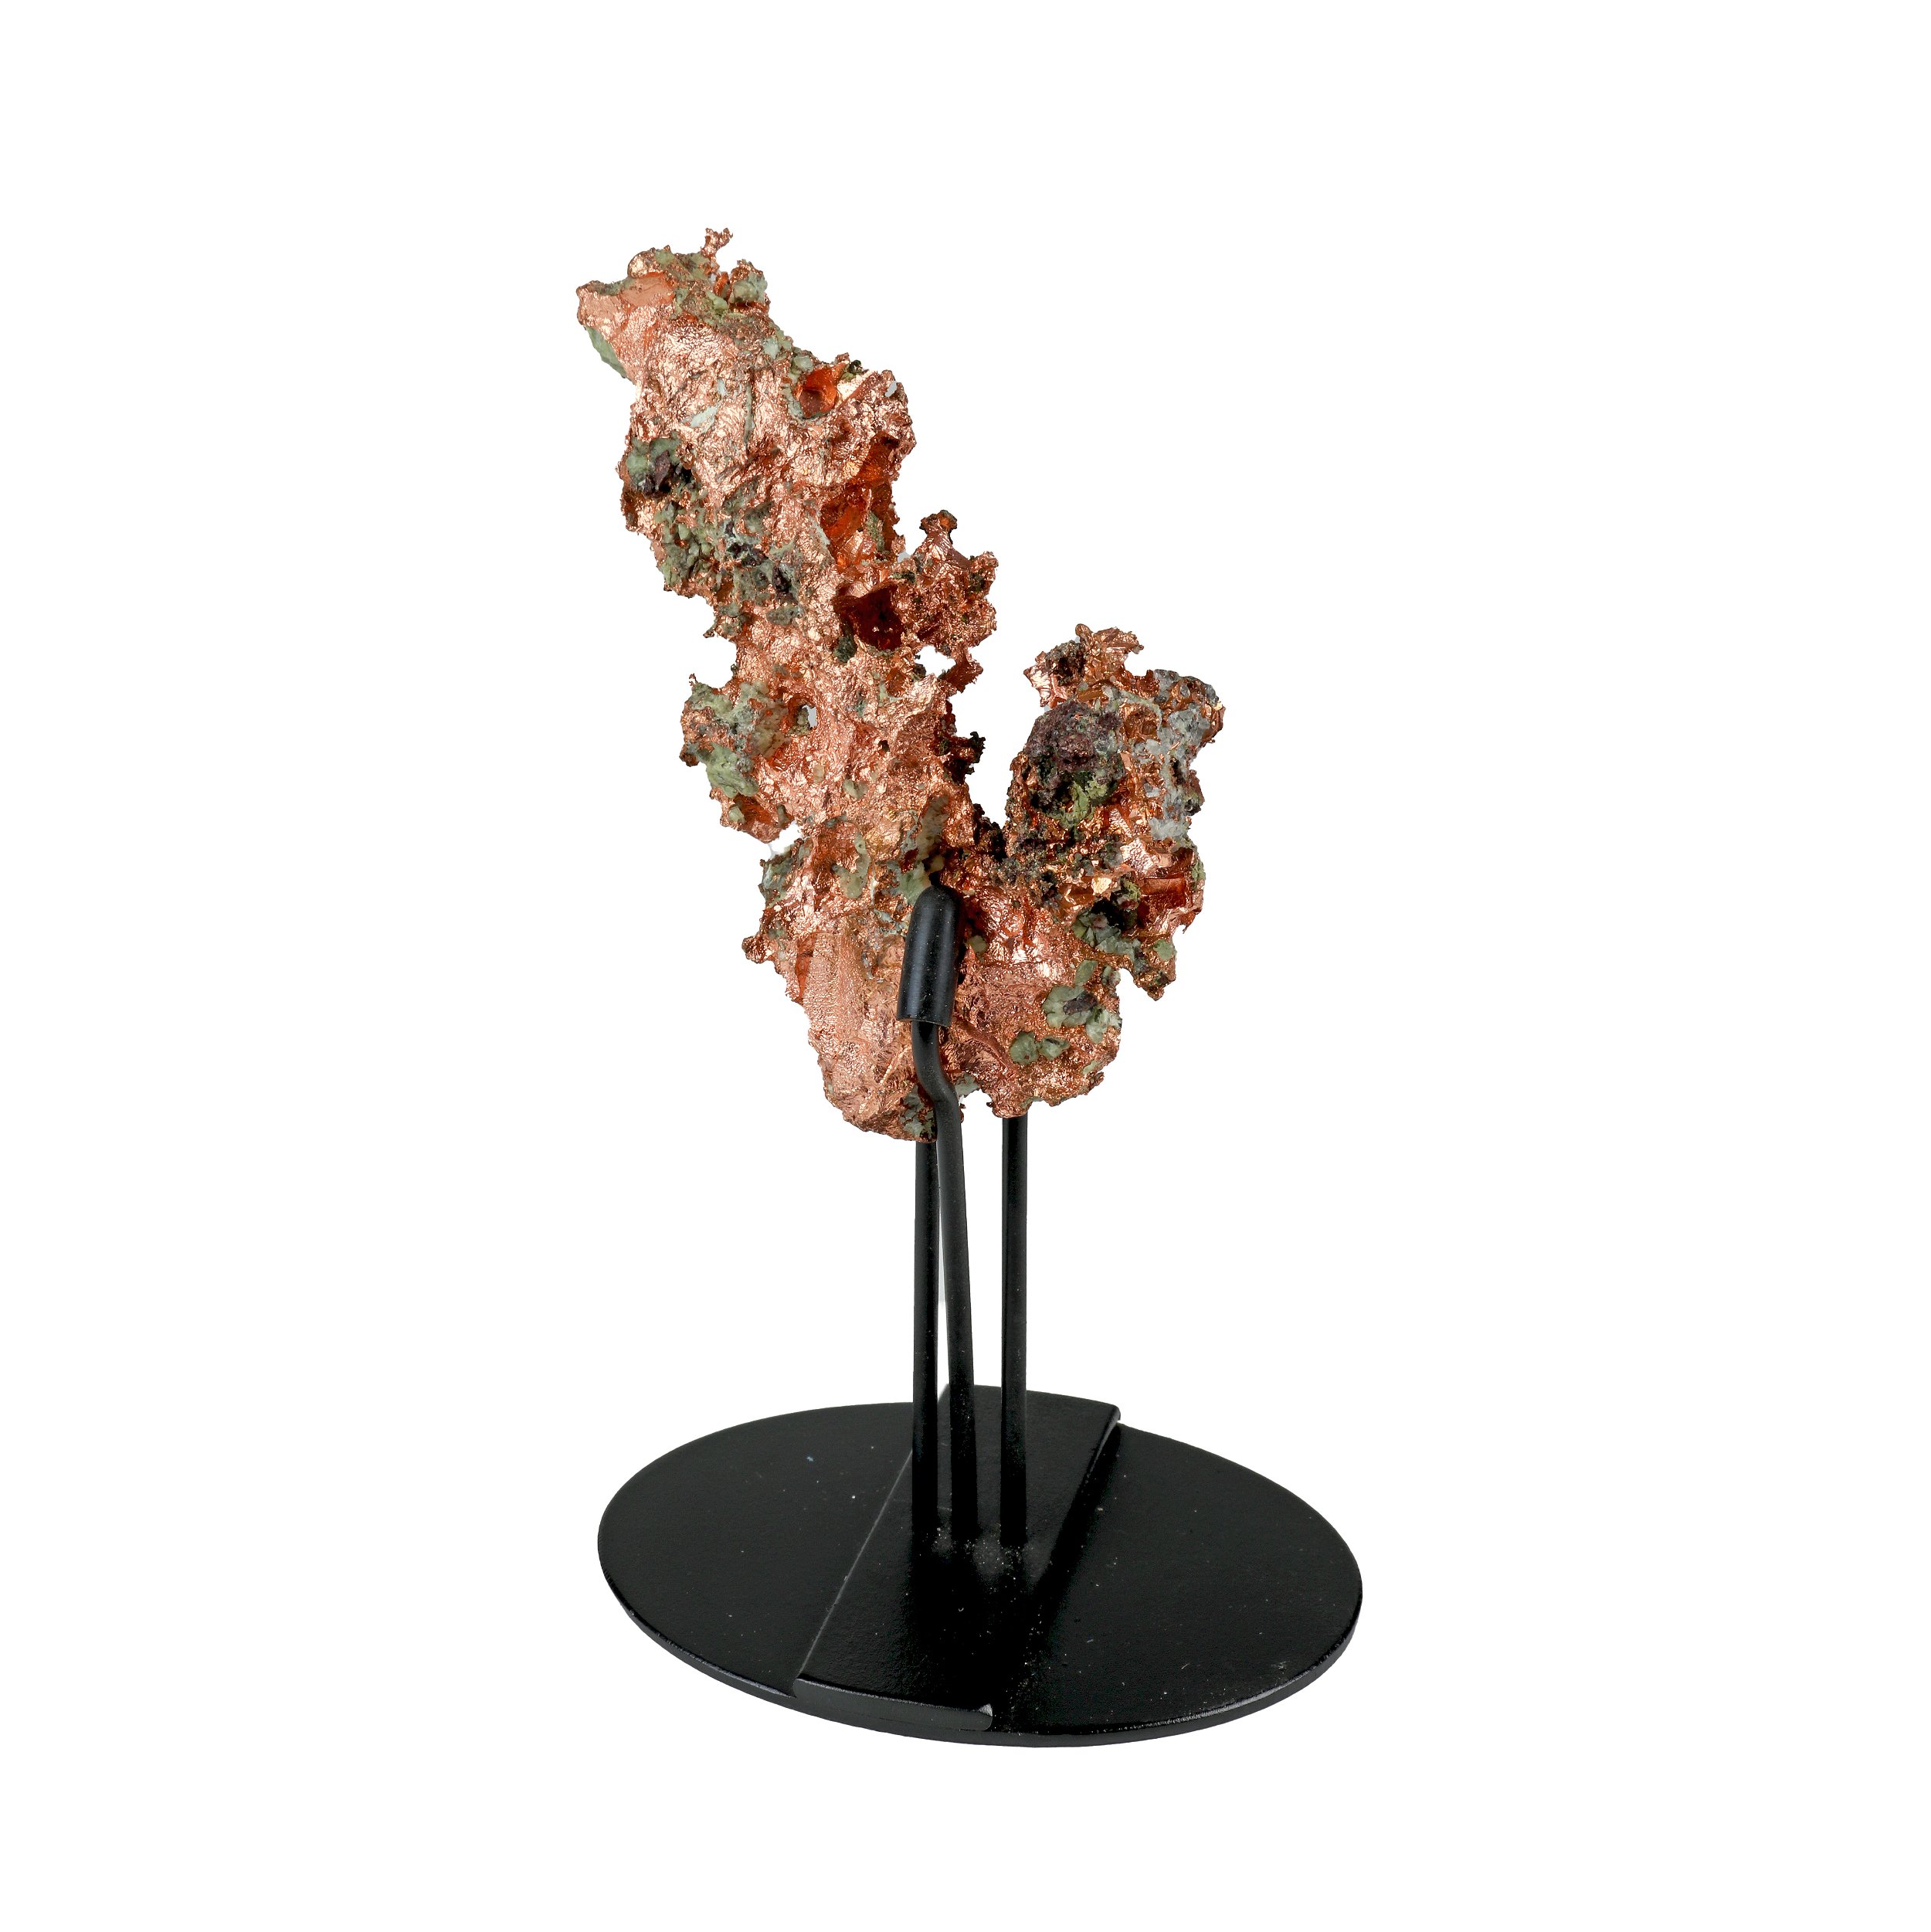 Michigan Native Copper In 3 - Pronged Tension Fit Stand With Crystalized Clusters